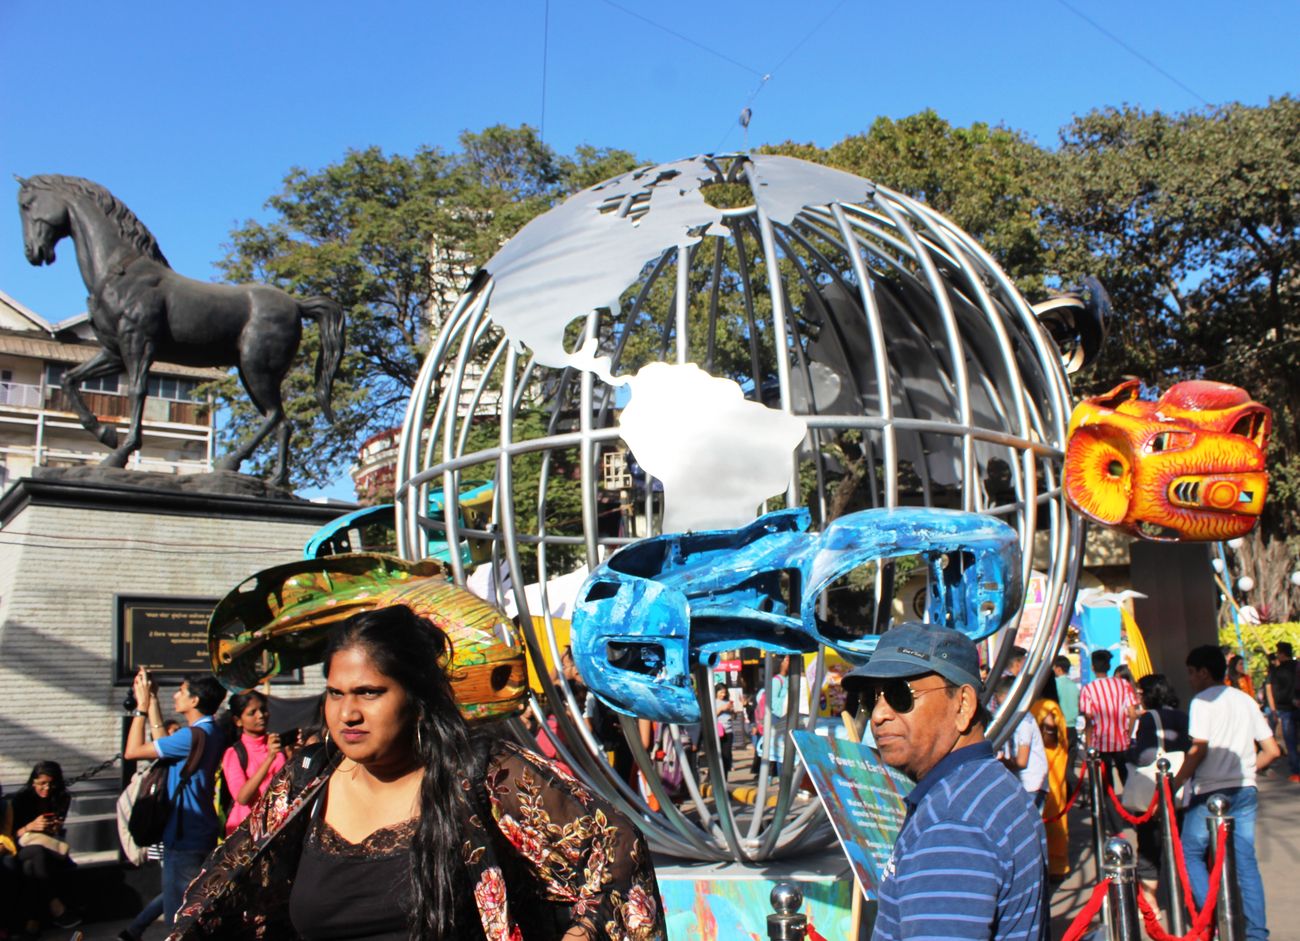 An eloquent representation of planet Earth with silver metal. It is an art set up installed near the statue titled 'Spirit of Kala Ghoda', at the Kala Ghoda Arts Fest 